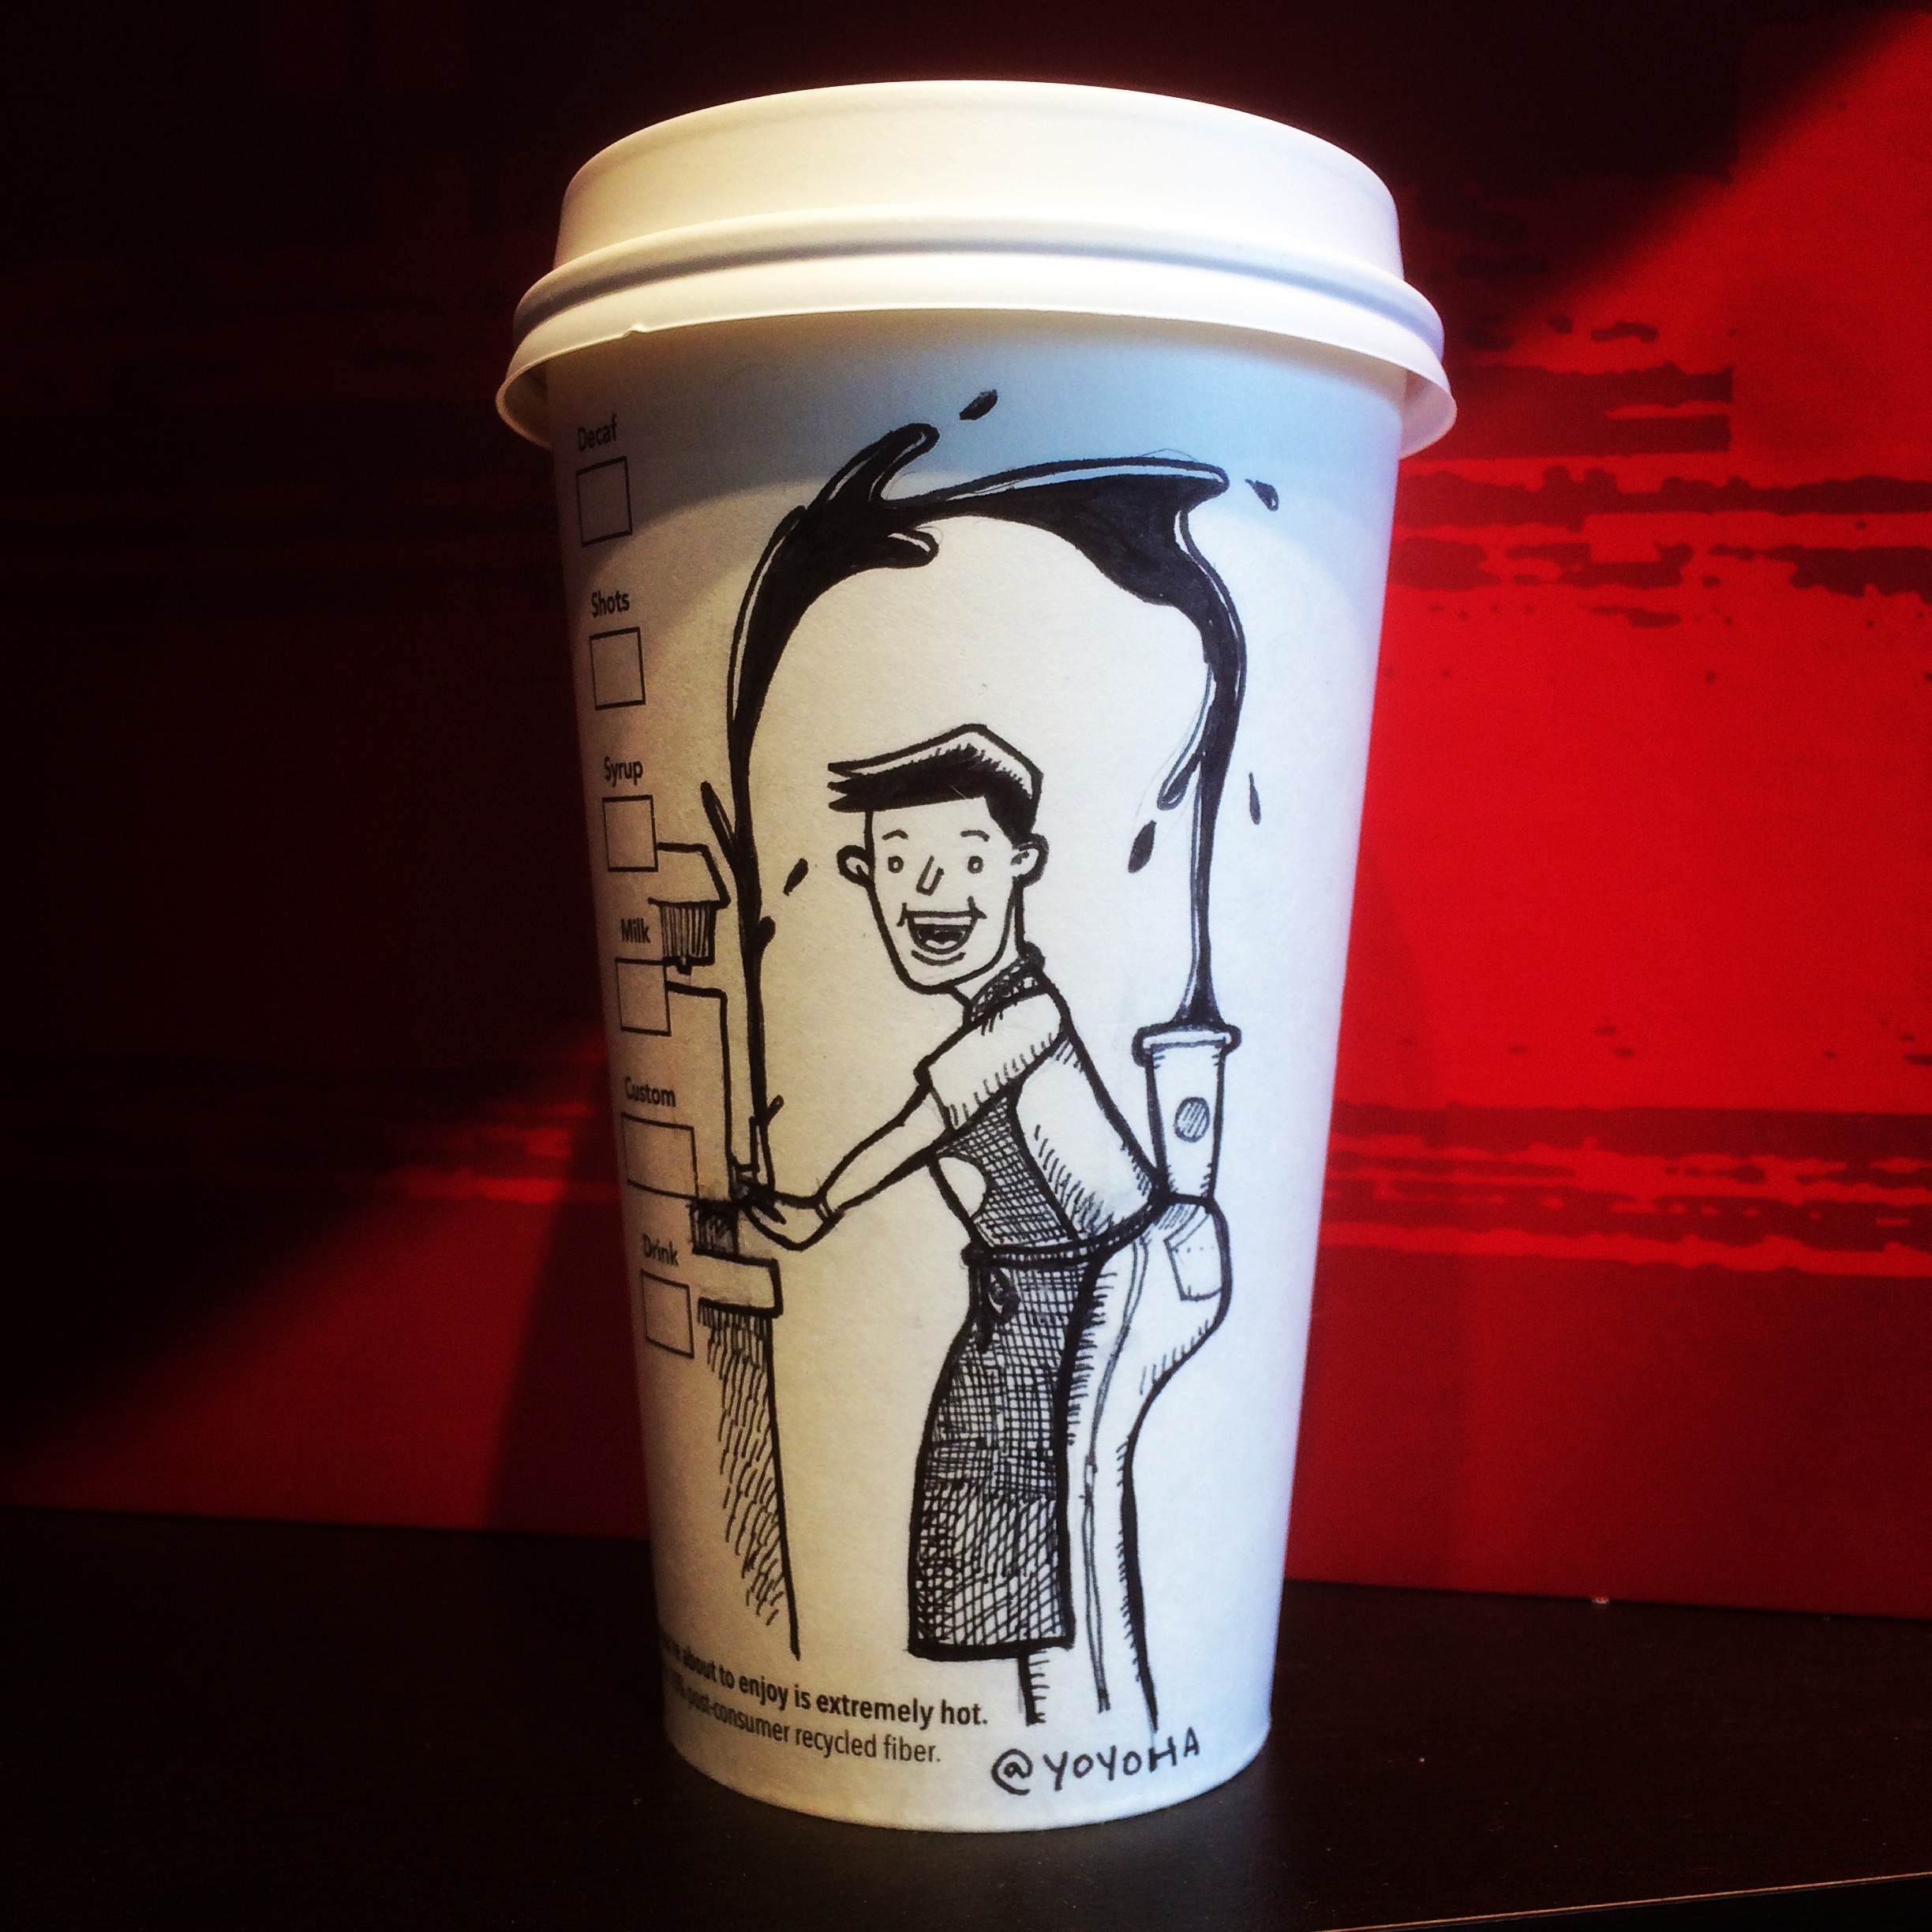 Twitter jokester's 100 coffee-cup cartoons brew up laughs, go viral